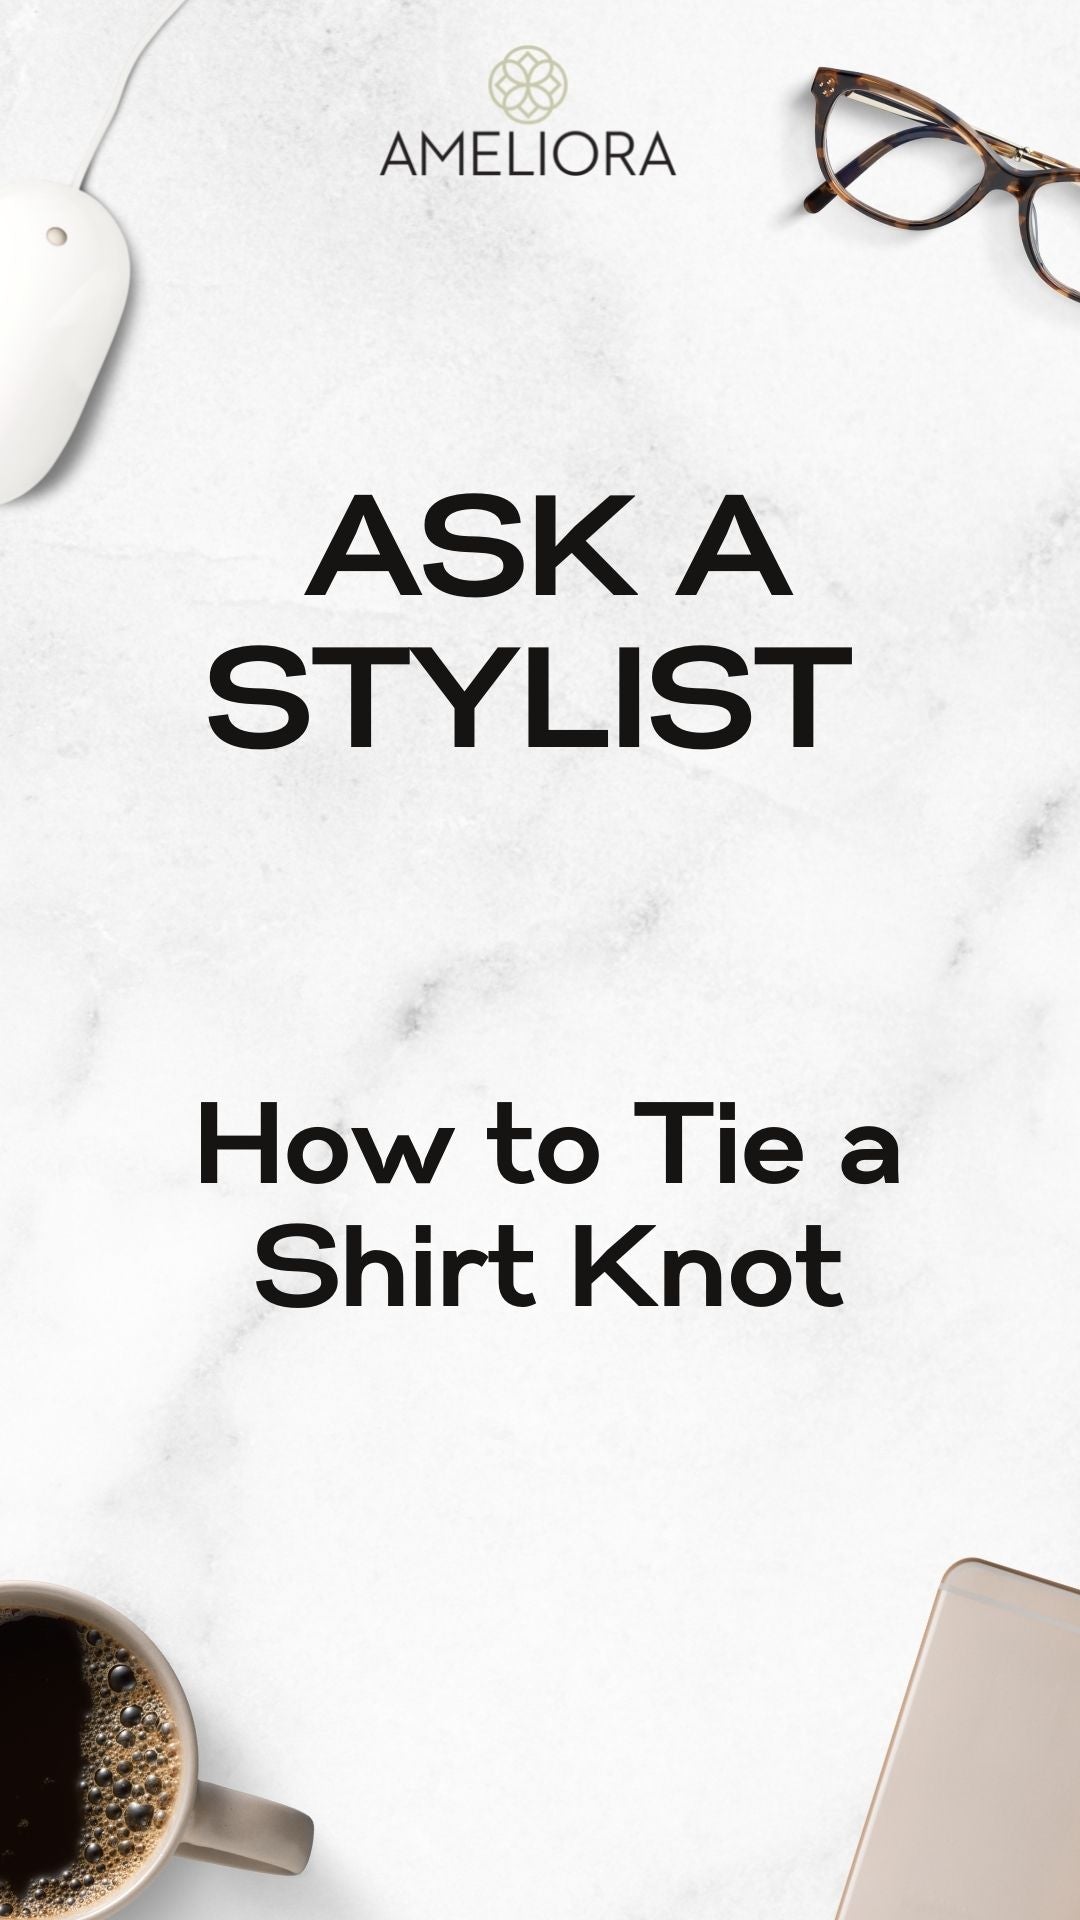 How Can I Tie My Shirt?